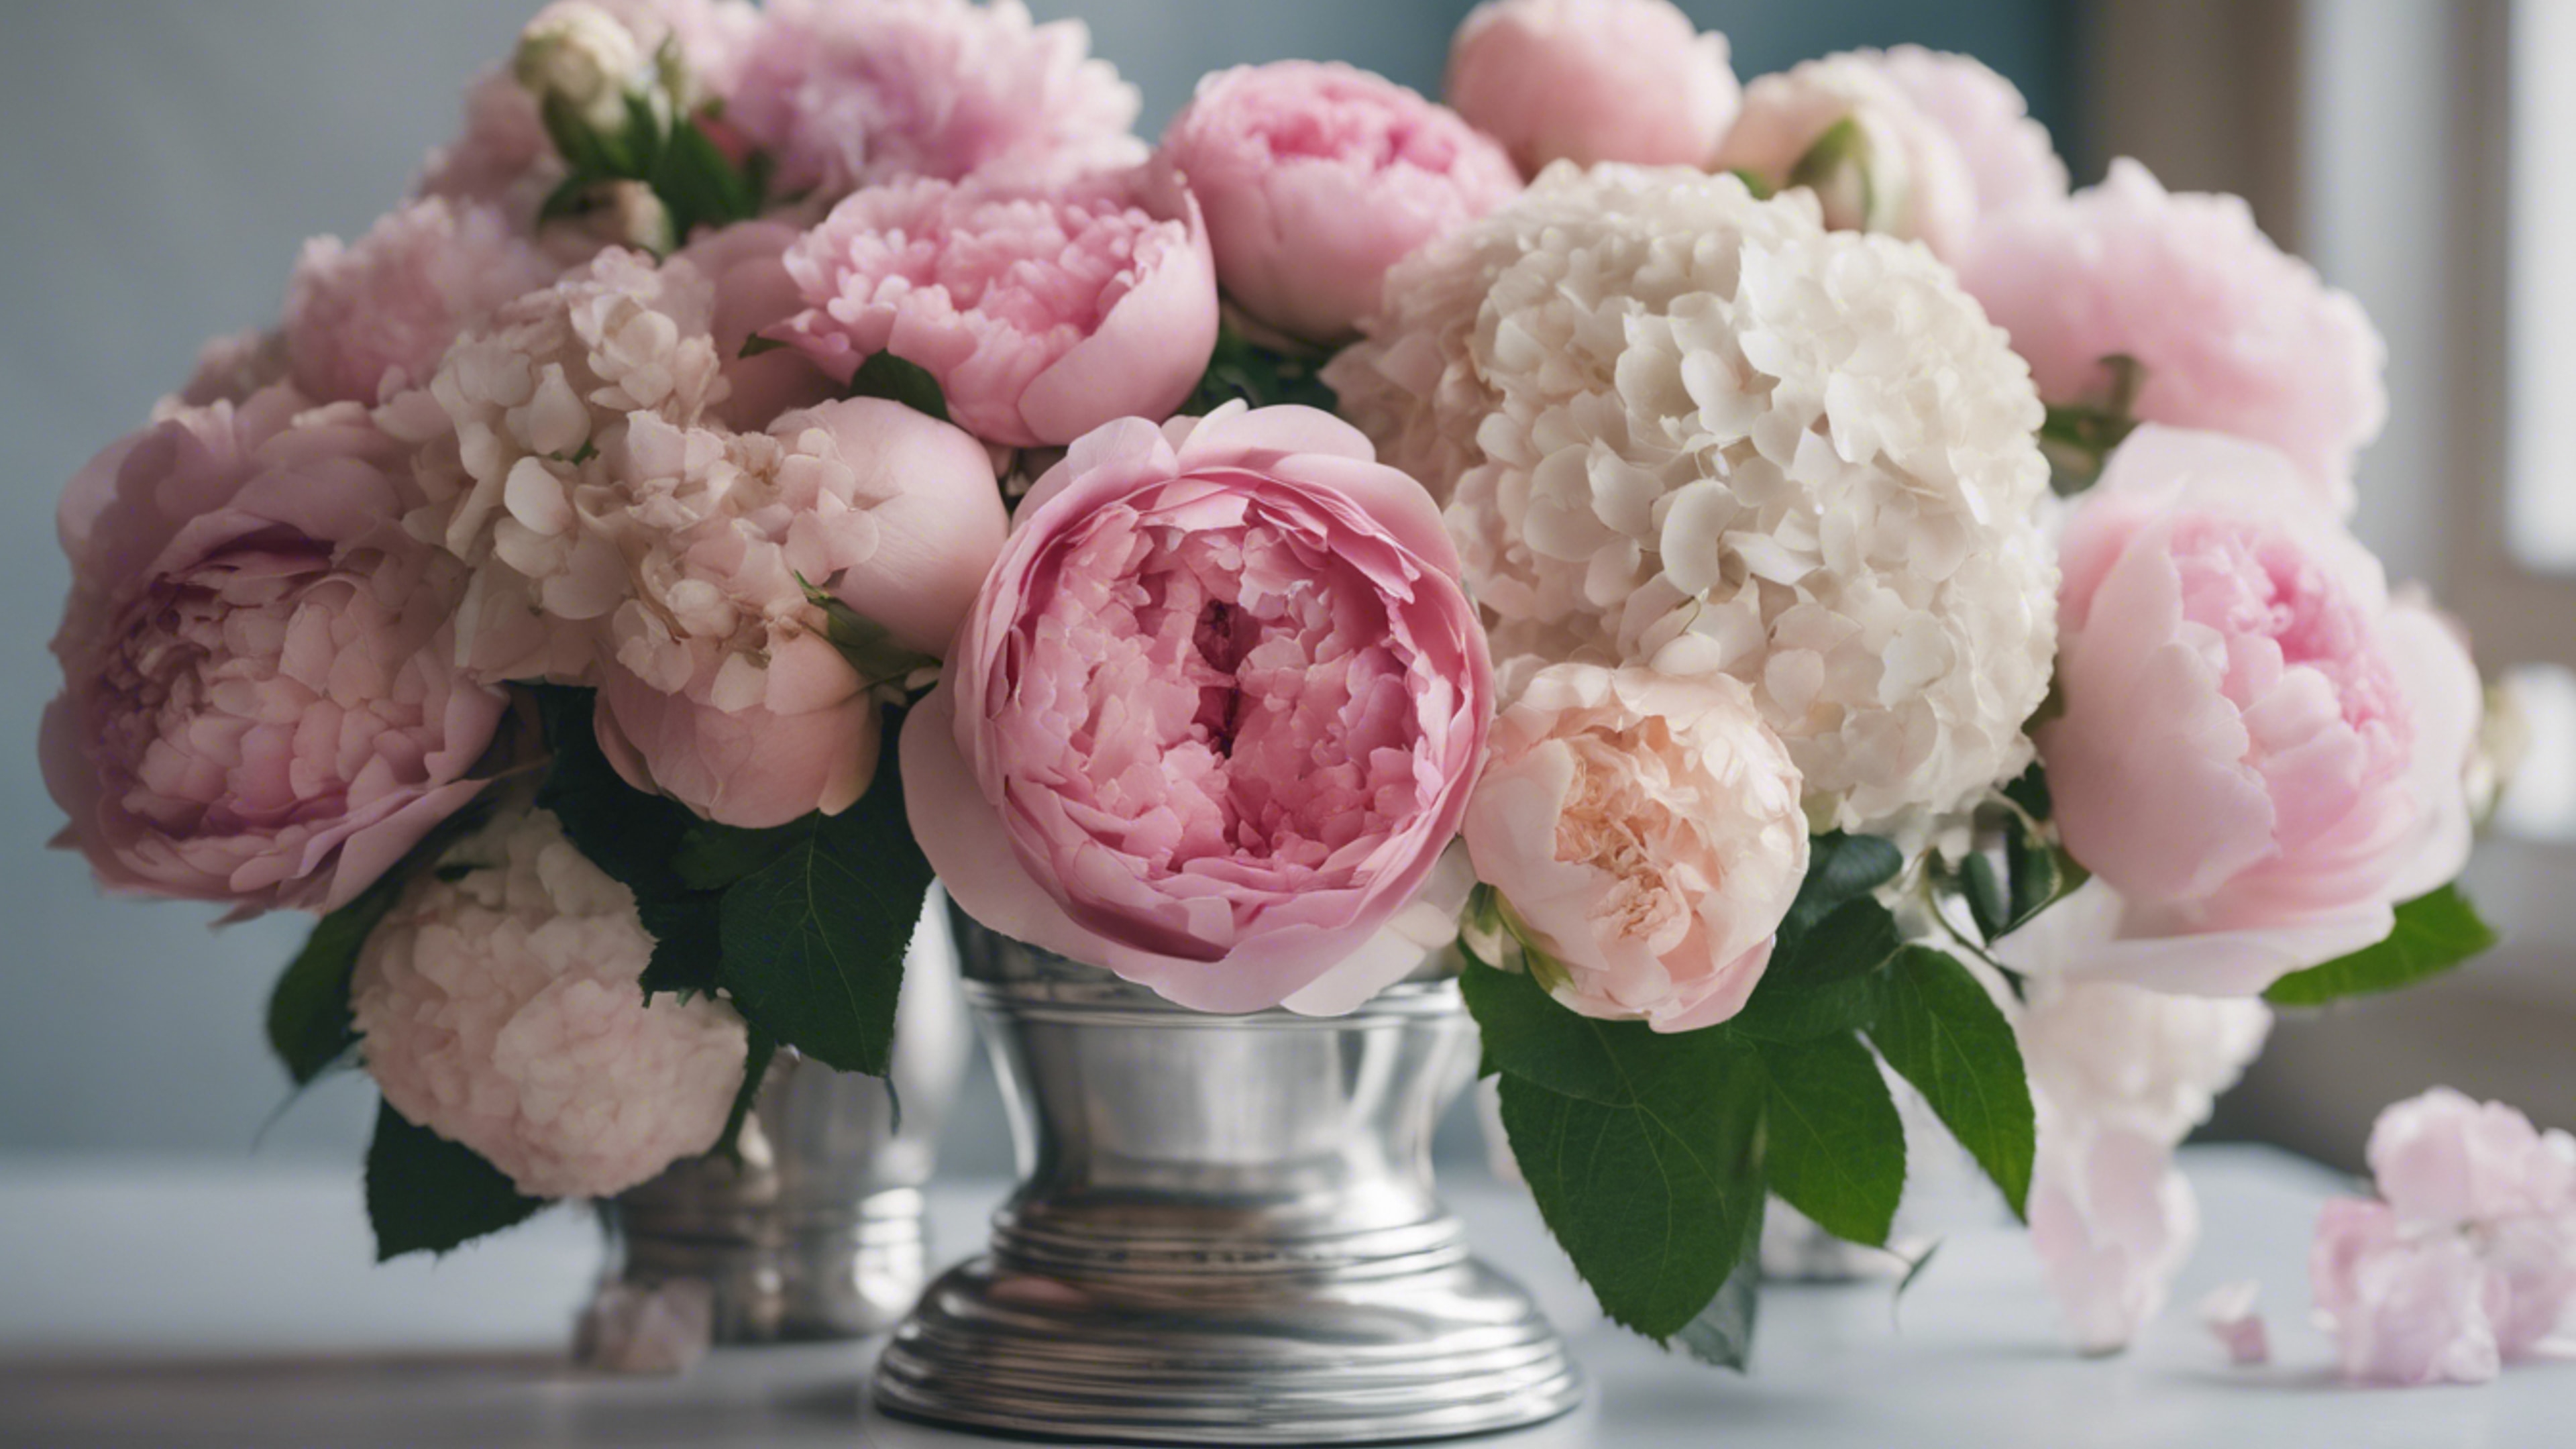 An arrangement of pink roses, peonies, and hydrangeas in a silver vase, embodying preppy elegance. Tapet[810d260cf91945bd97fc]